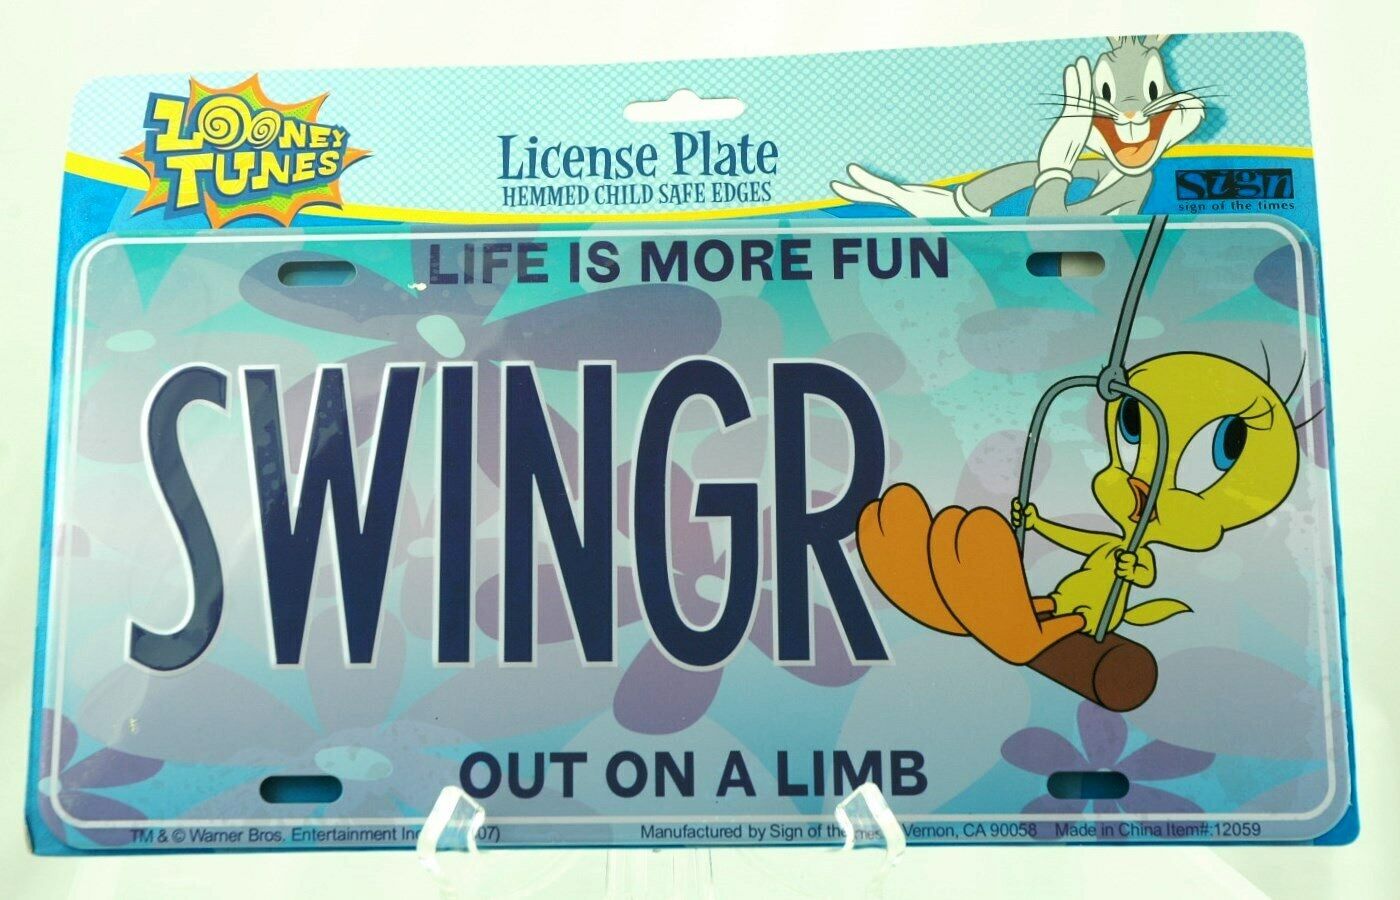 TWEETY BIRD SWINGR Collectible License Plate Out on a Limb Looney Toon - NEW